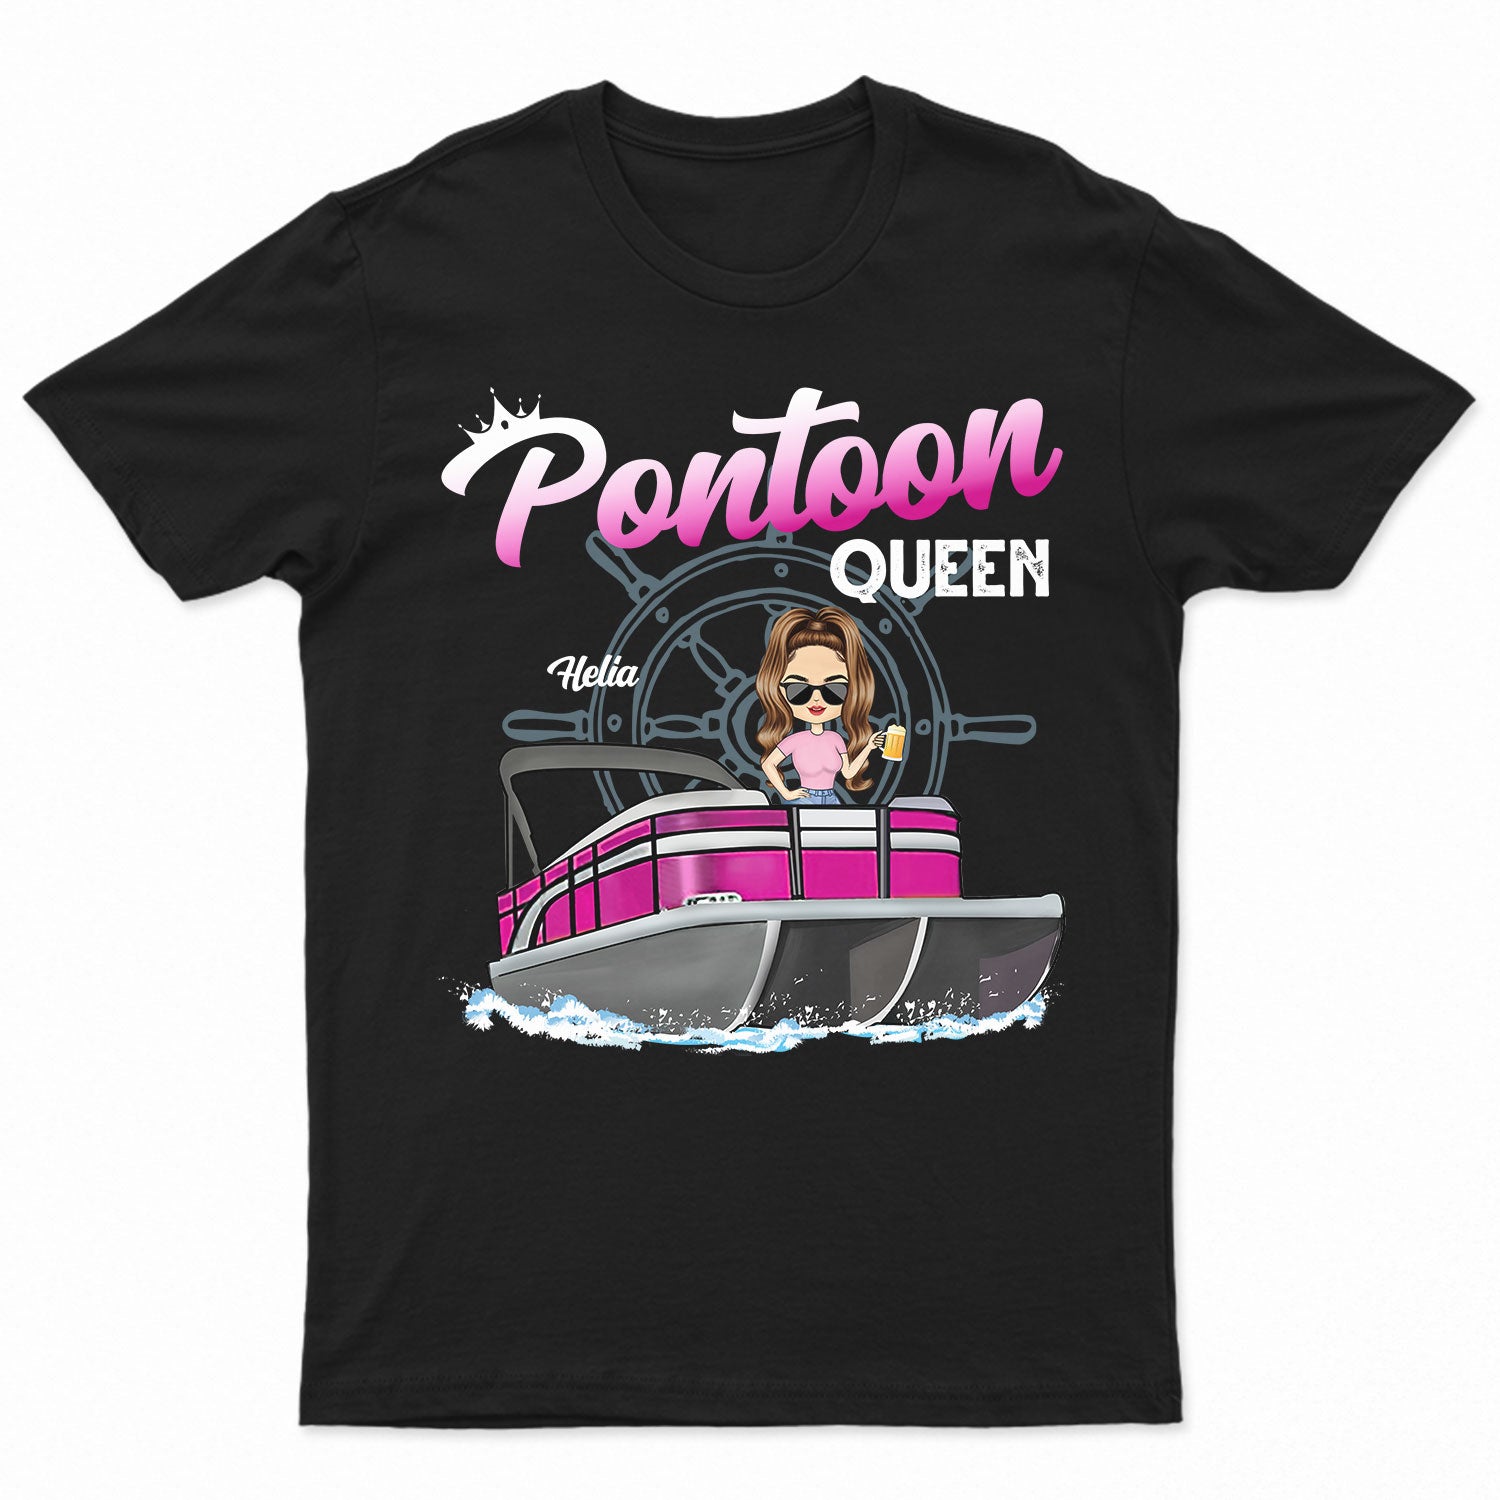 Boating Pontoon Queen - Birthday Gift For Pontooning Lovers, Lake Lovers, Travelers, Women - Personalized Custom T Shirt